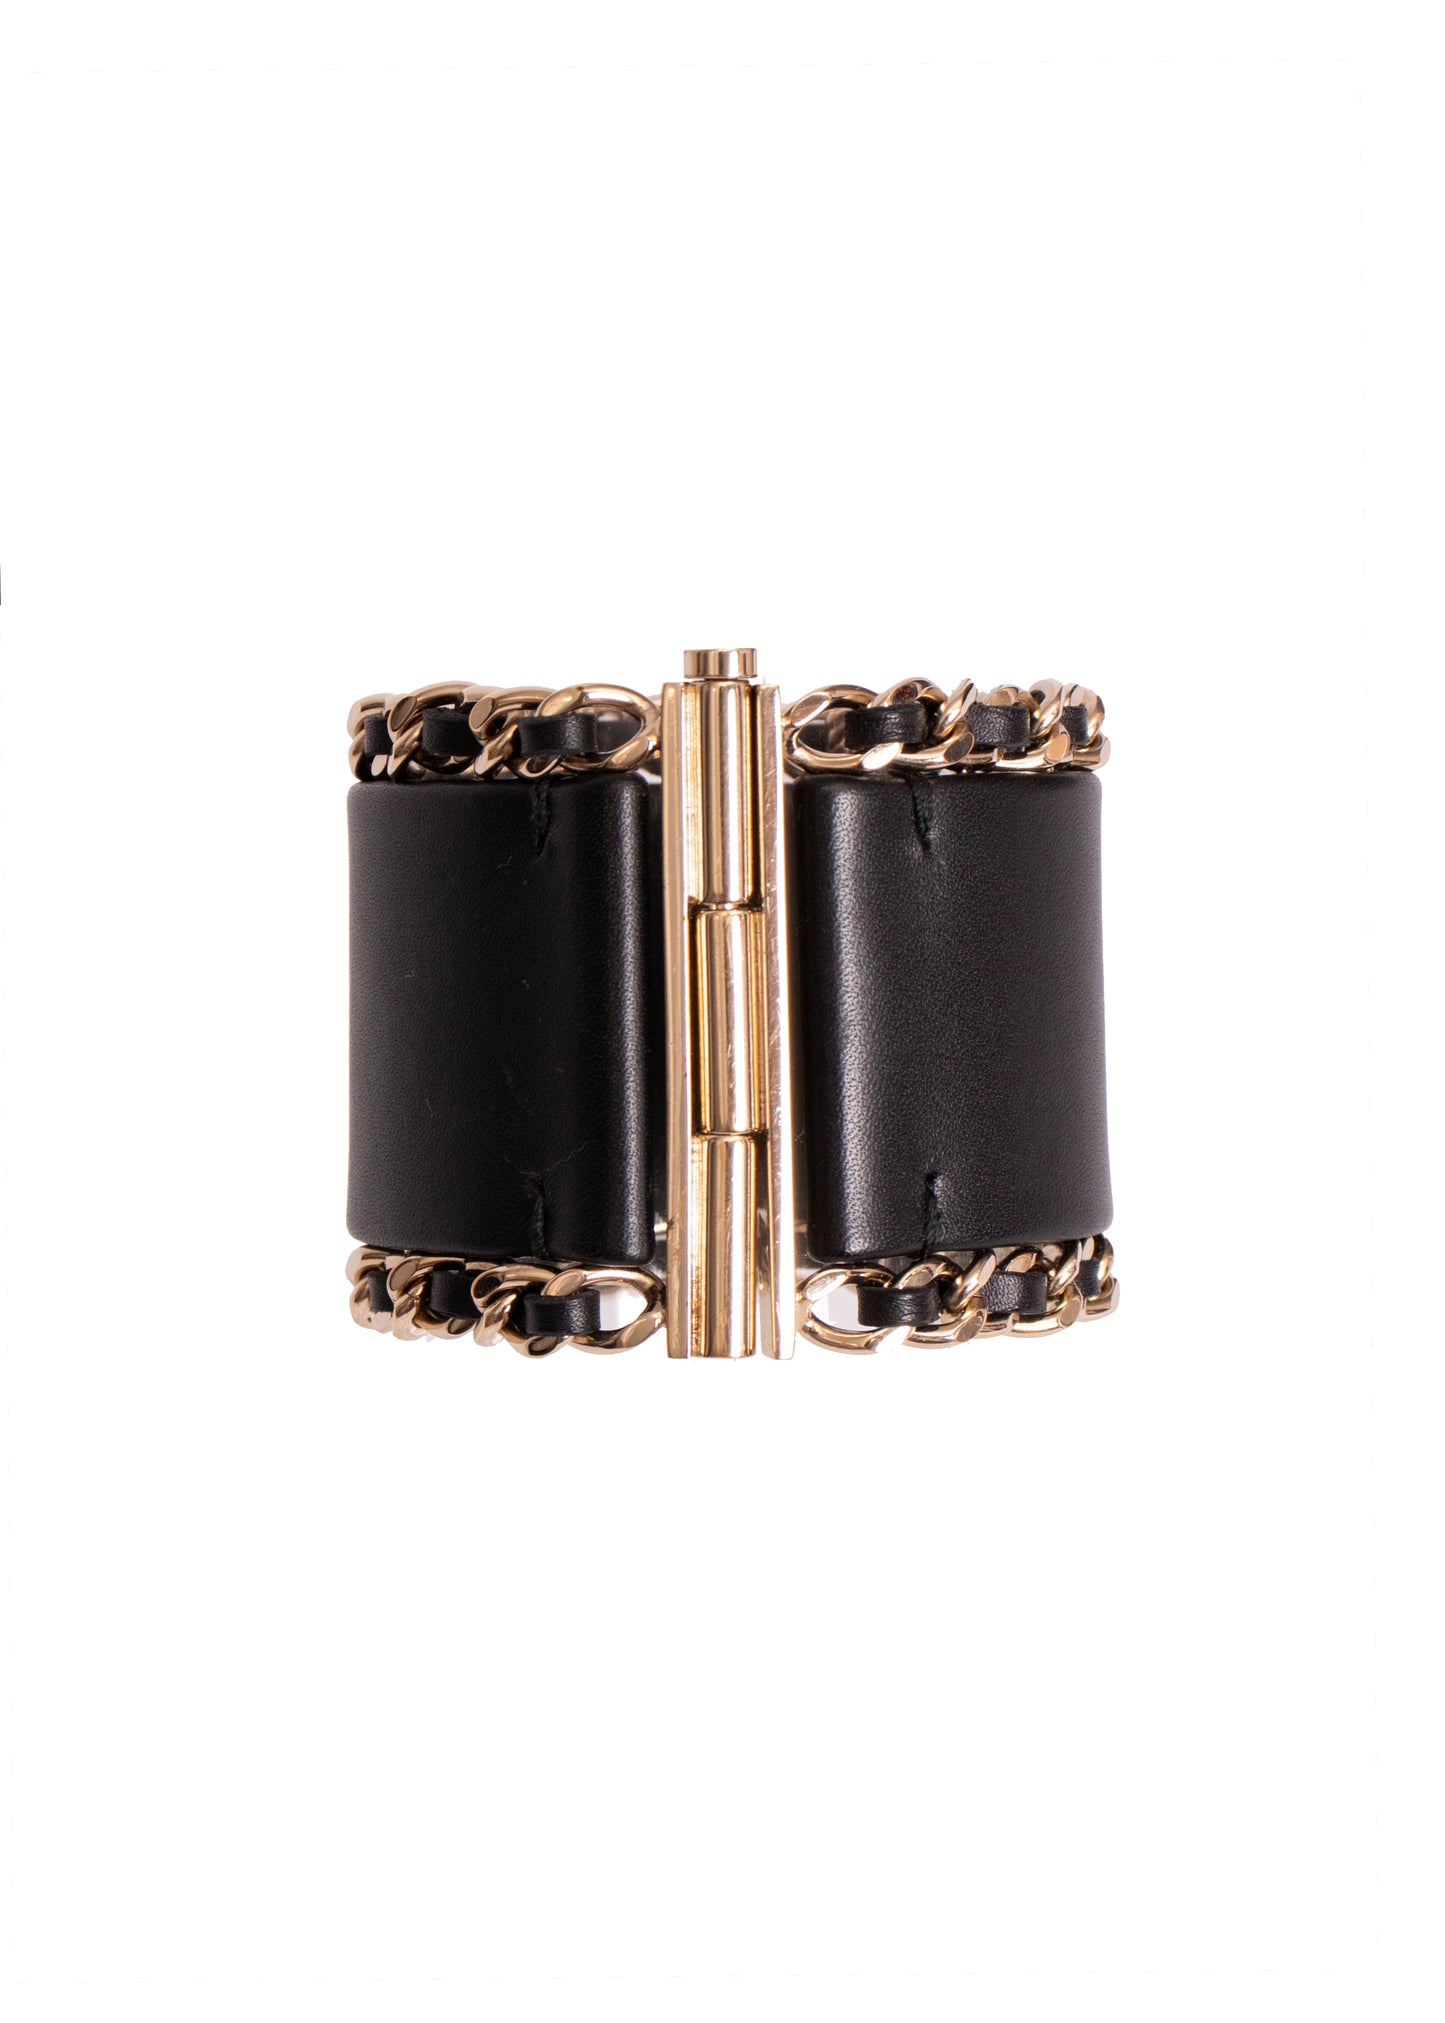 Chanel Leather & Gold Chain Cuff Bracelet